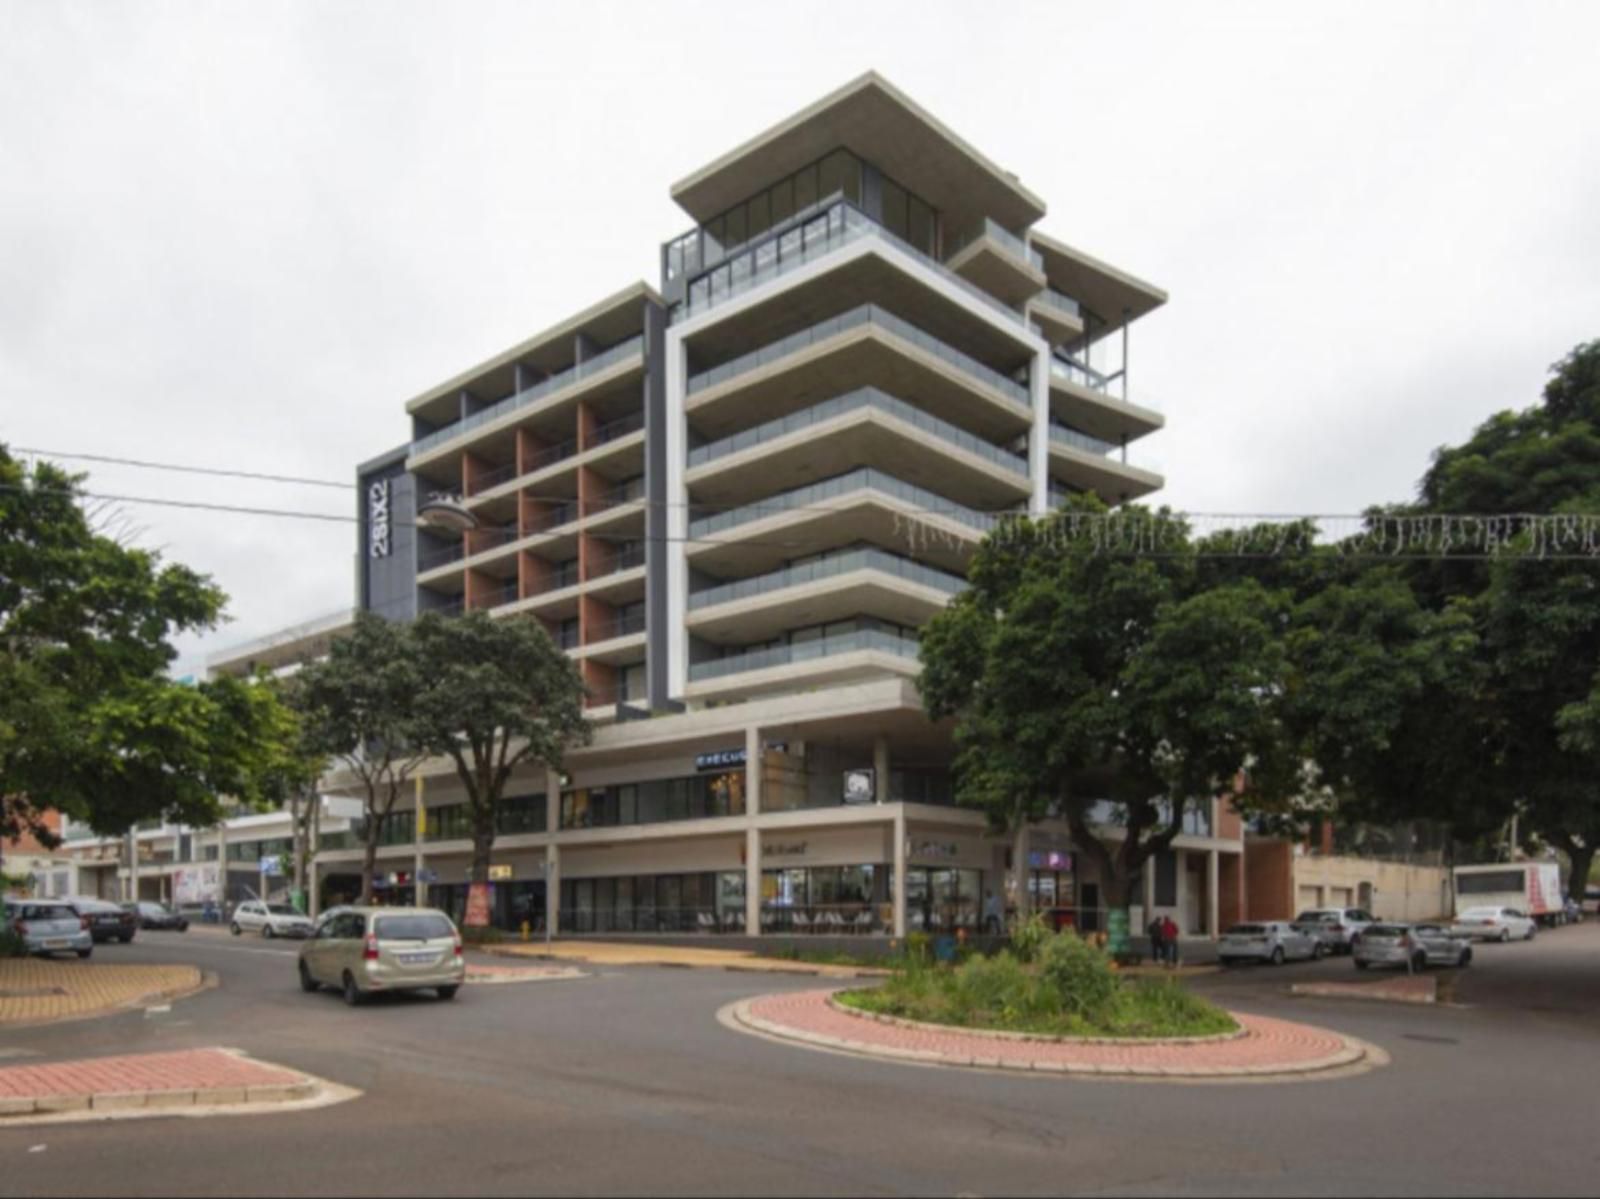 707 2Six2 Florida Road By Hostagents Windermere Durban Kwazulu Natal South Africa Unsaturated, Building, Architecture, House